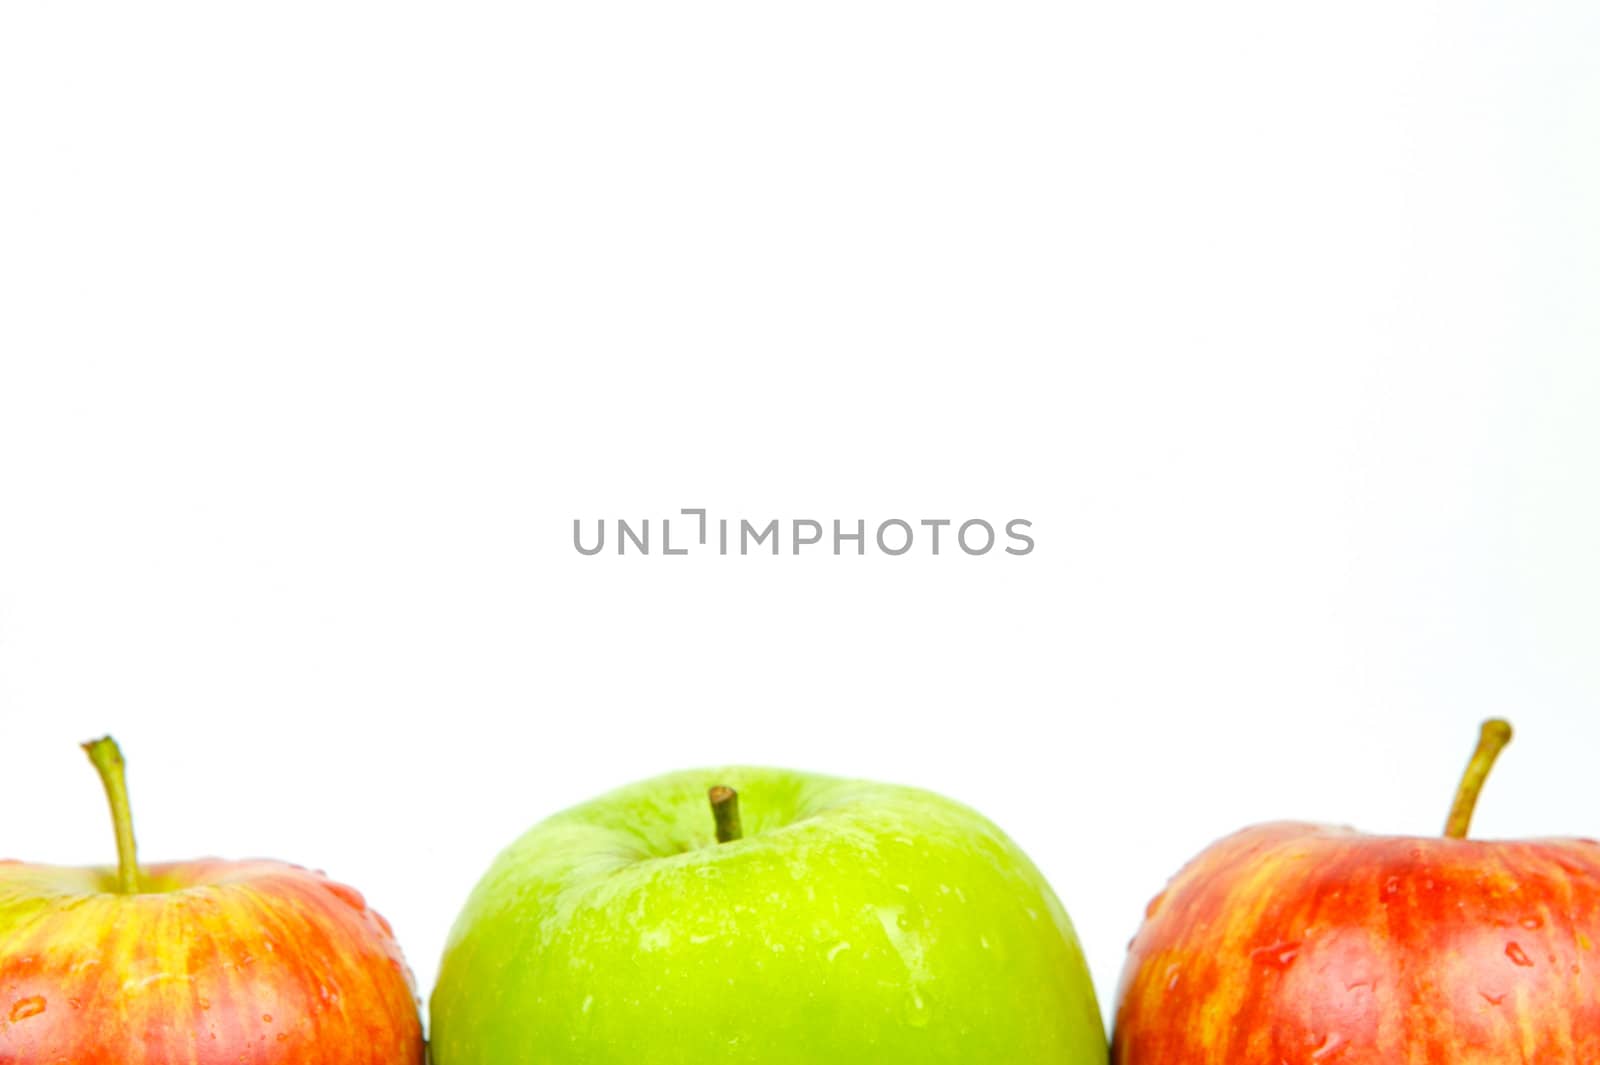 Red & Green Apples by Kitch